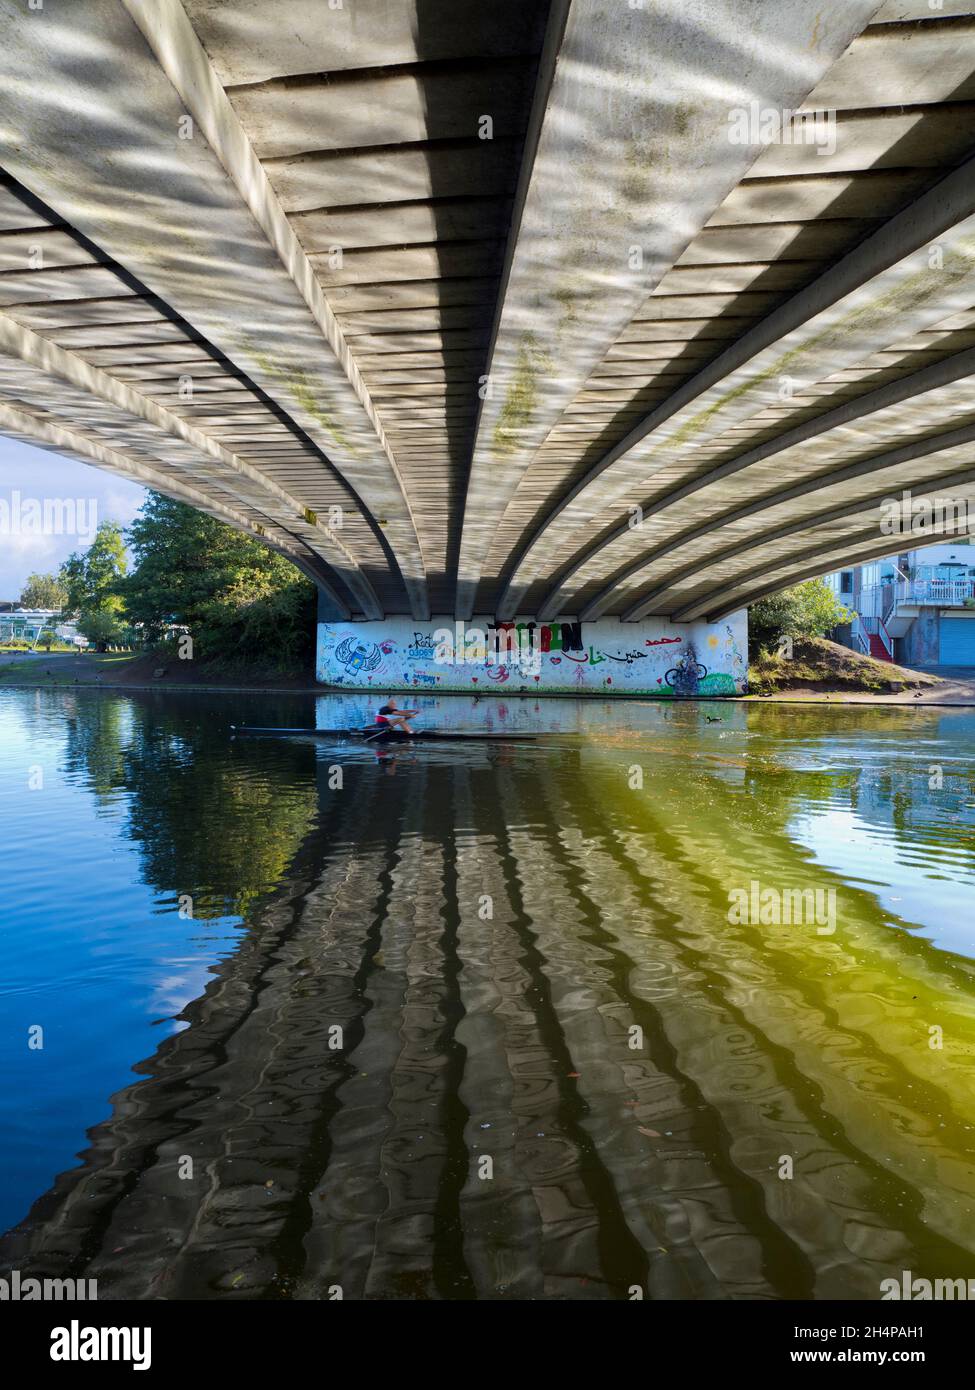 Donnington Bridge crosses the River Thames just upstream of Oxford. Here we see abstract reflections of rippled waters on its underside on a fine Autu Stock Photo